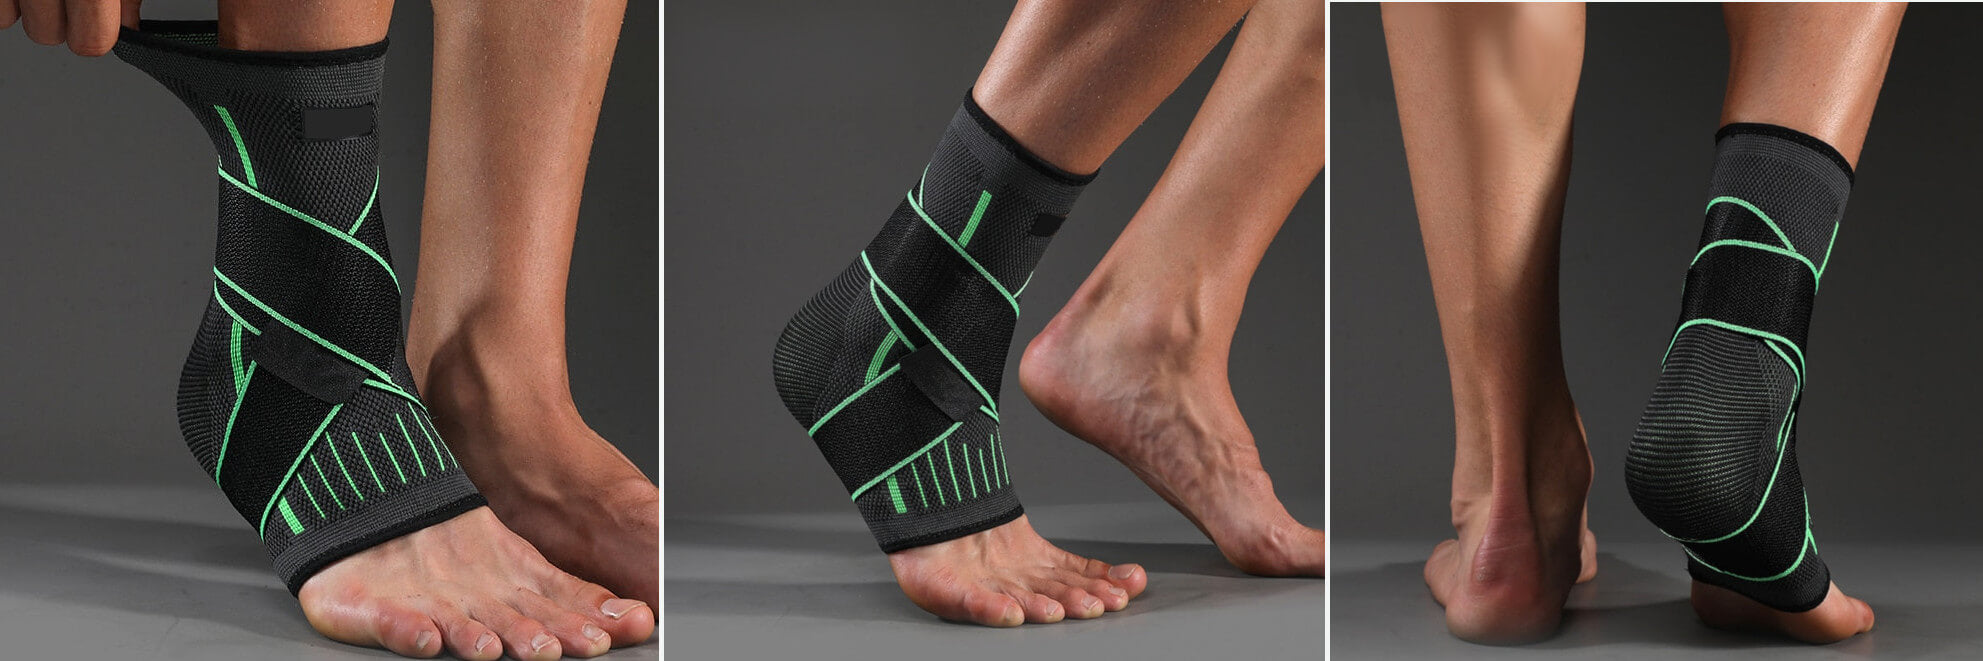 OrthoRelieve's ankle compression sleeve with support straps can help soothe pain and aid in recovery from sprains, tendonitis, plantar fasciitis, ankle fractures, edema, swelling or just general pain.